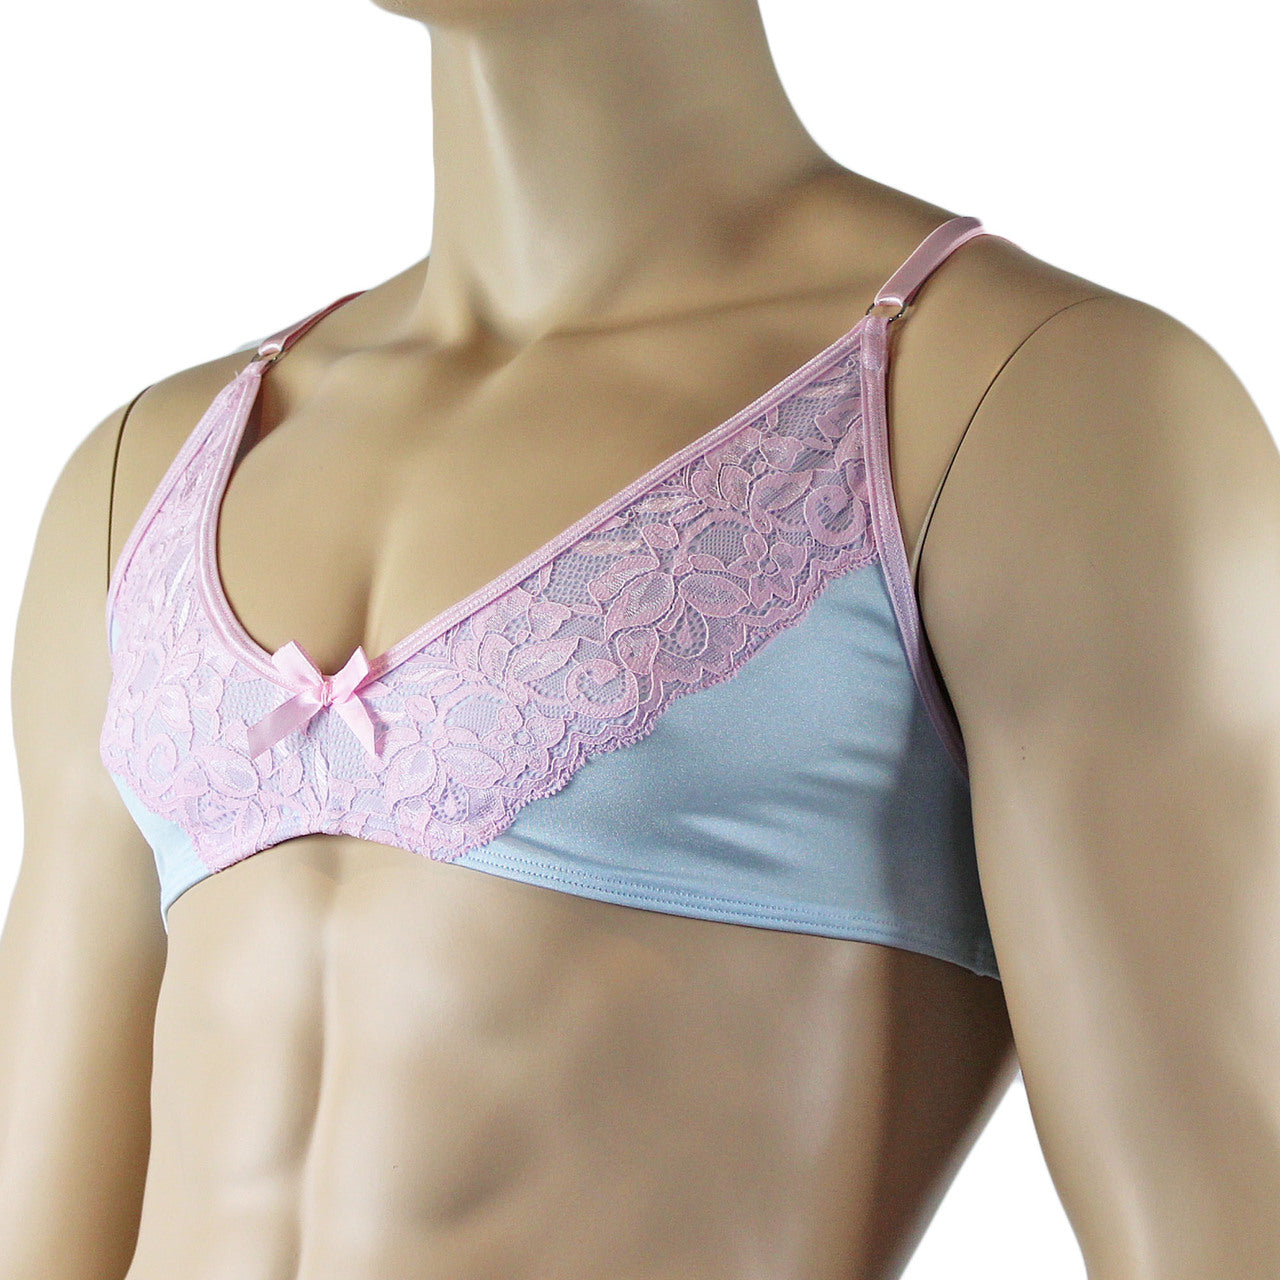 Mens Isabel Bra Top with Floral Lace Trim Male Lingerie (light blue and pink plus other colours)